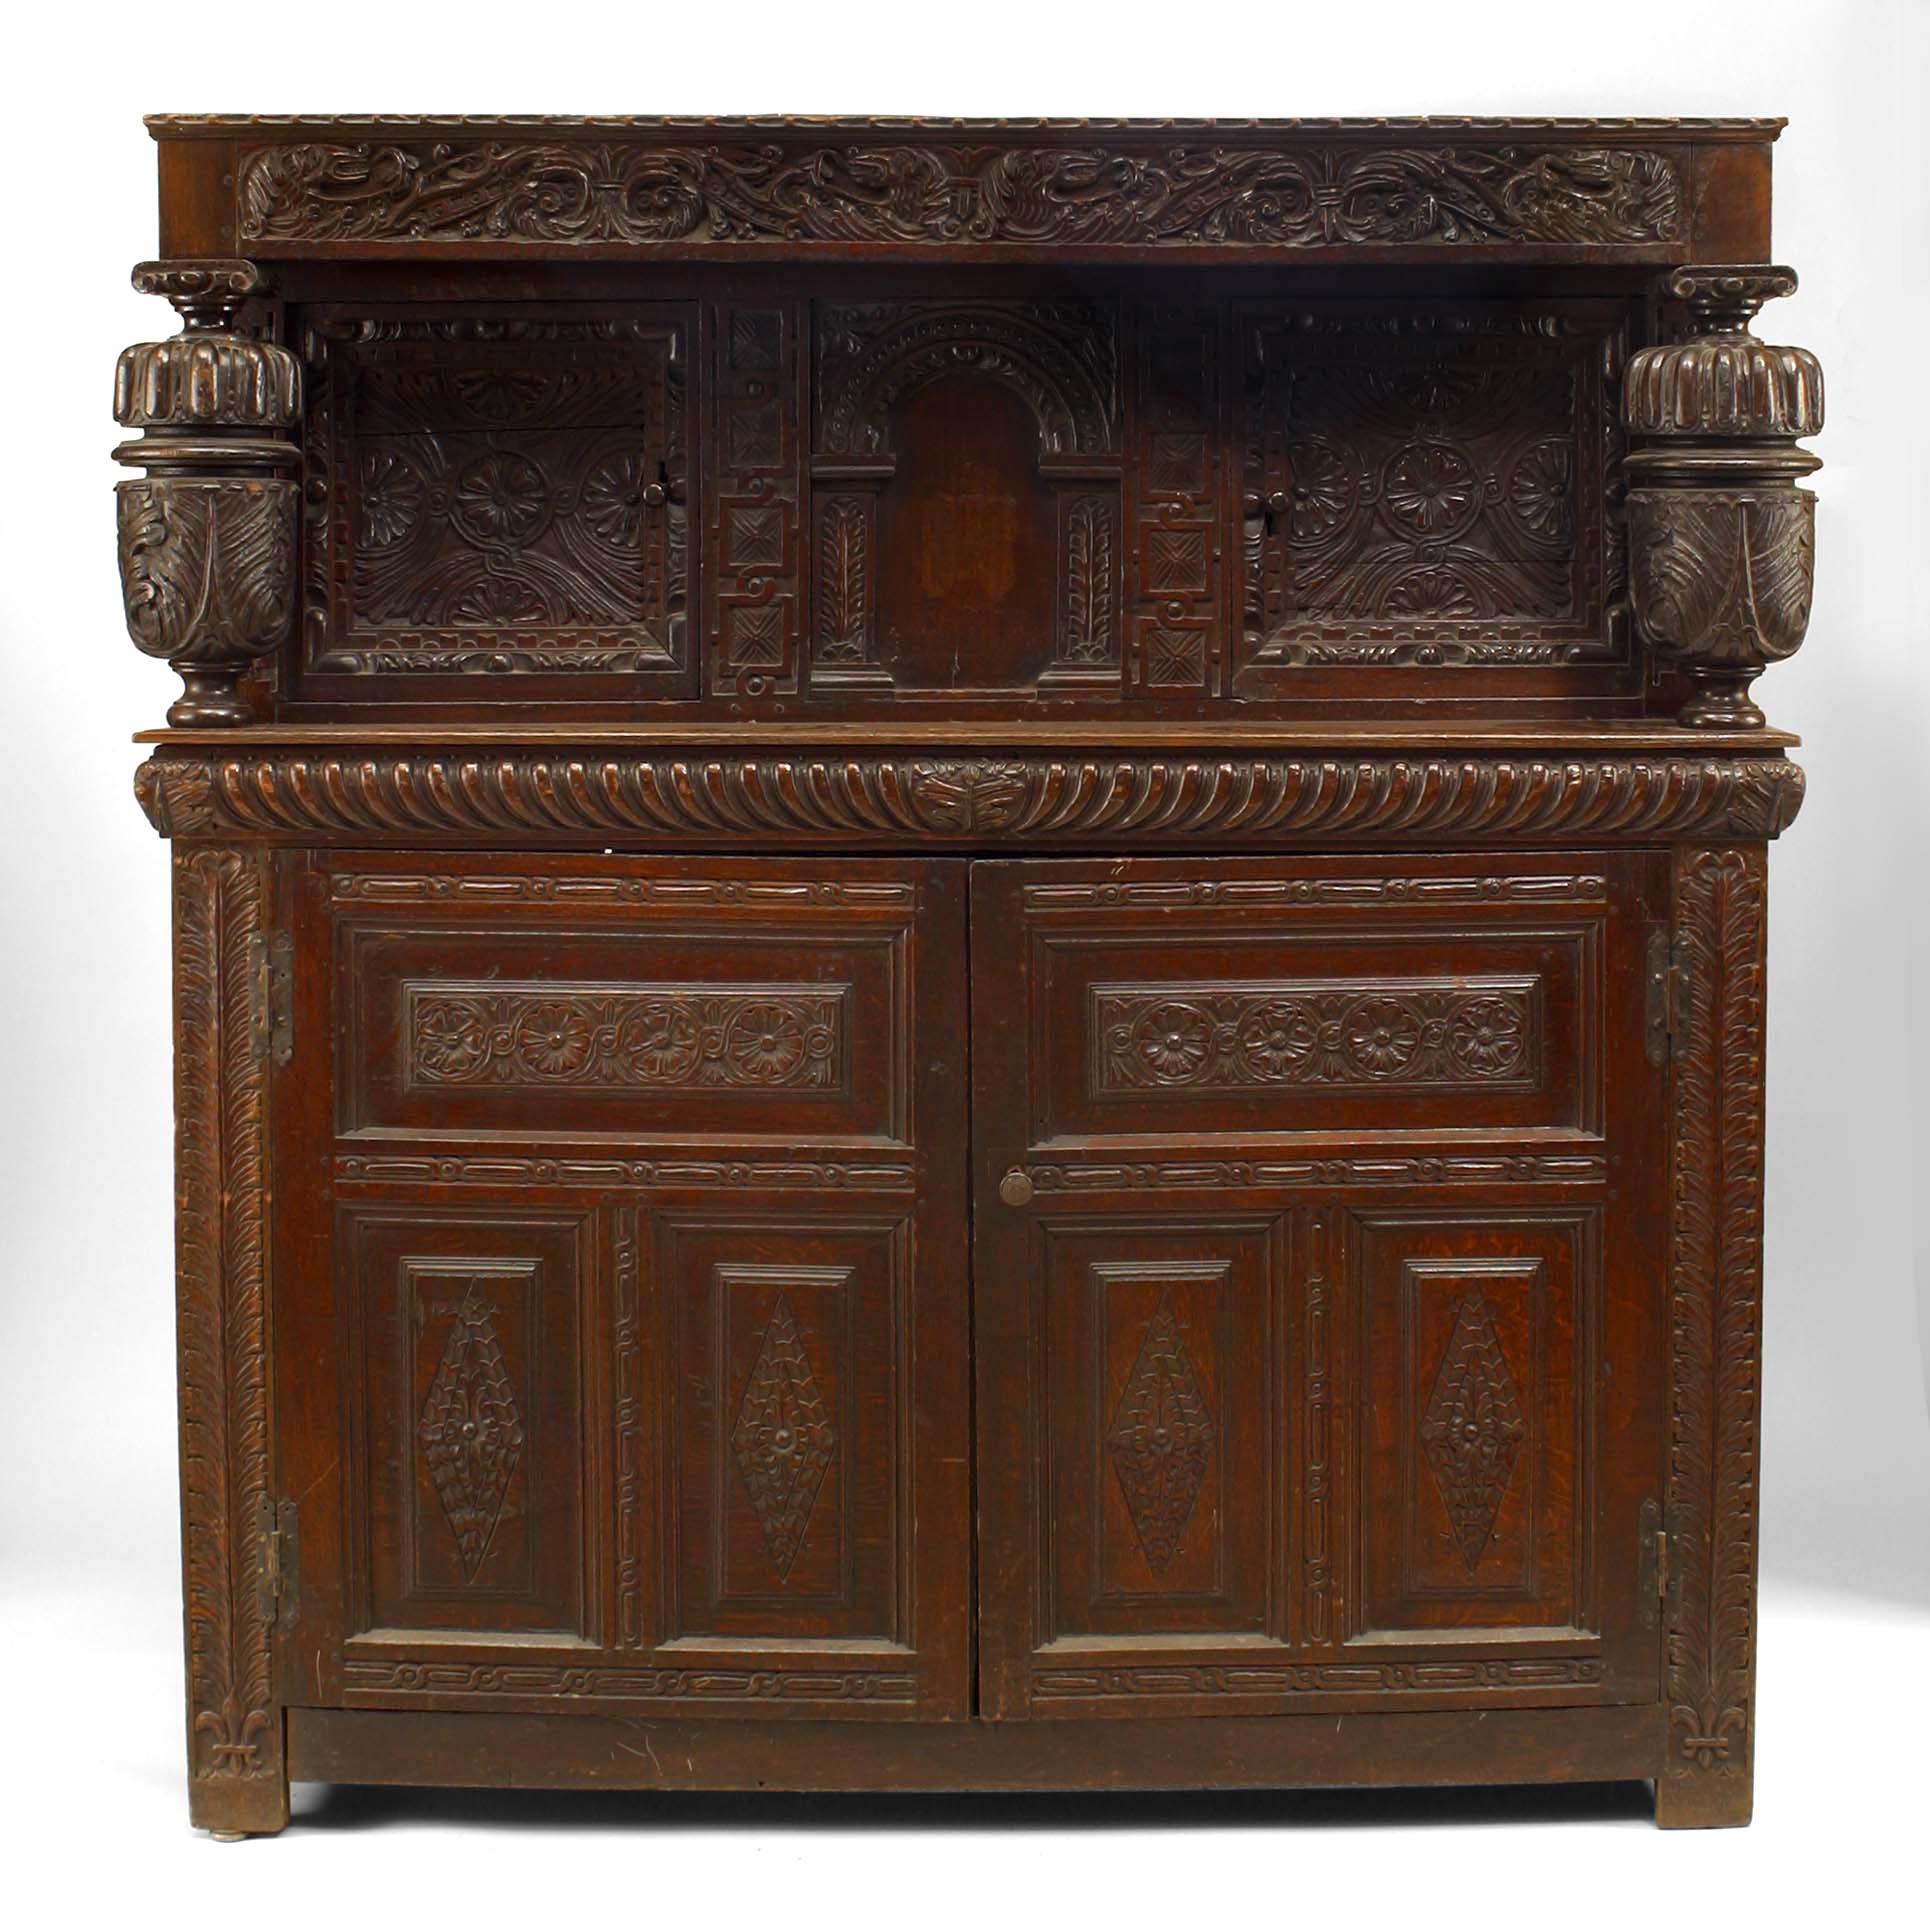 English Charles II-style (17th Century and Later) oak court cupboard of paneled construction with a Pair of doors behind baluster uprights over another Pair of doors
